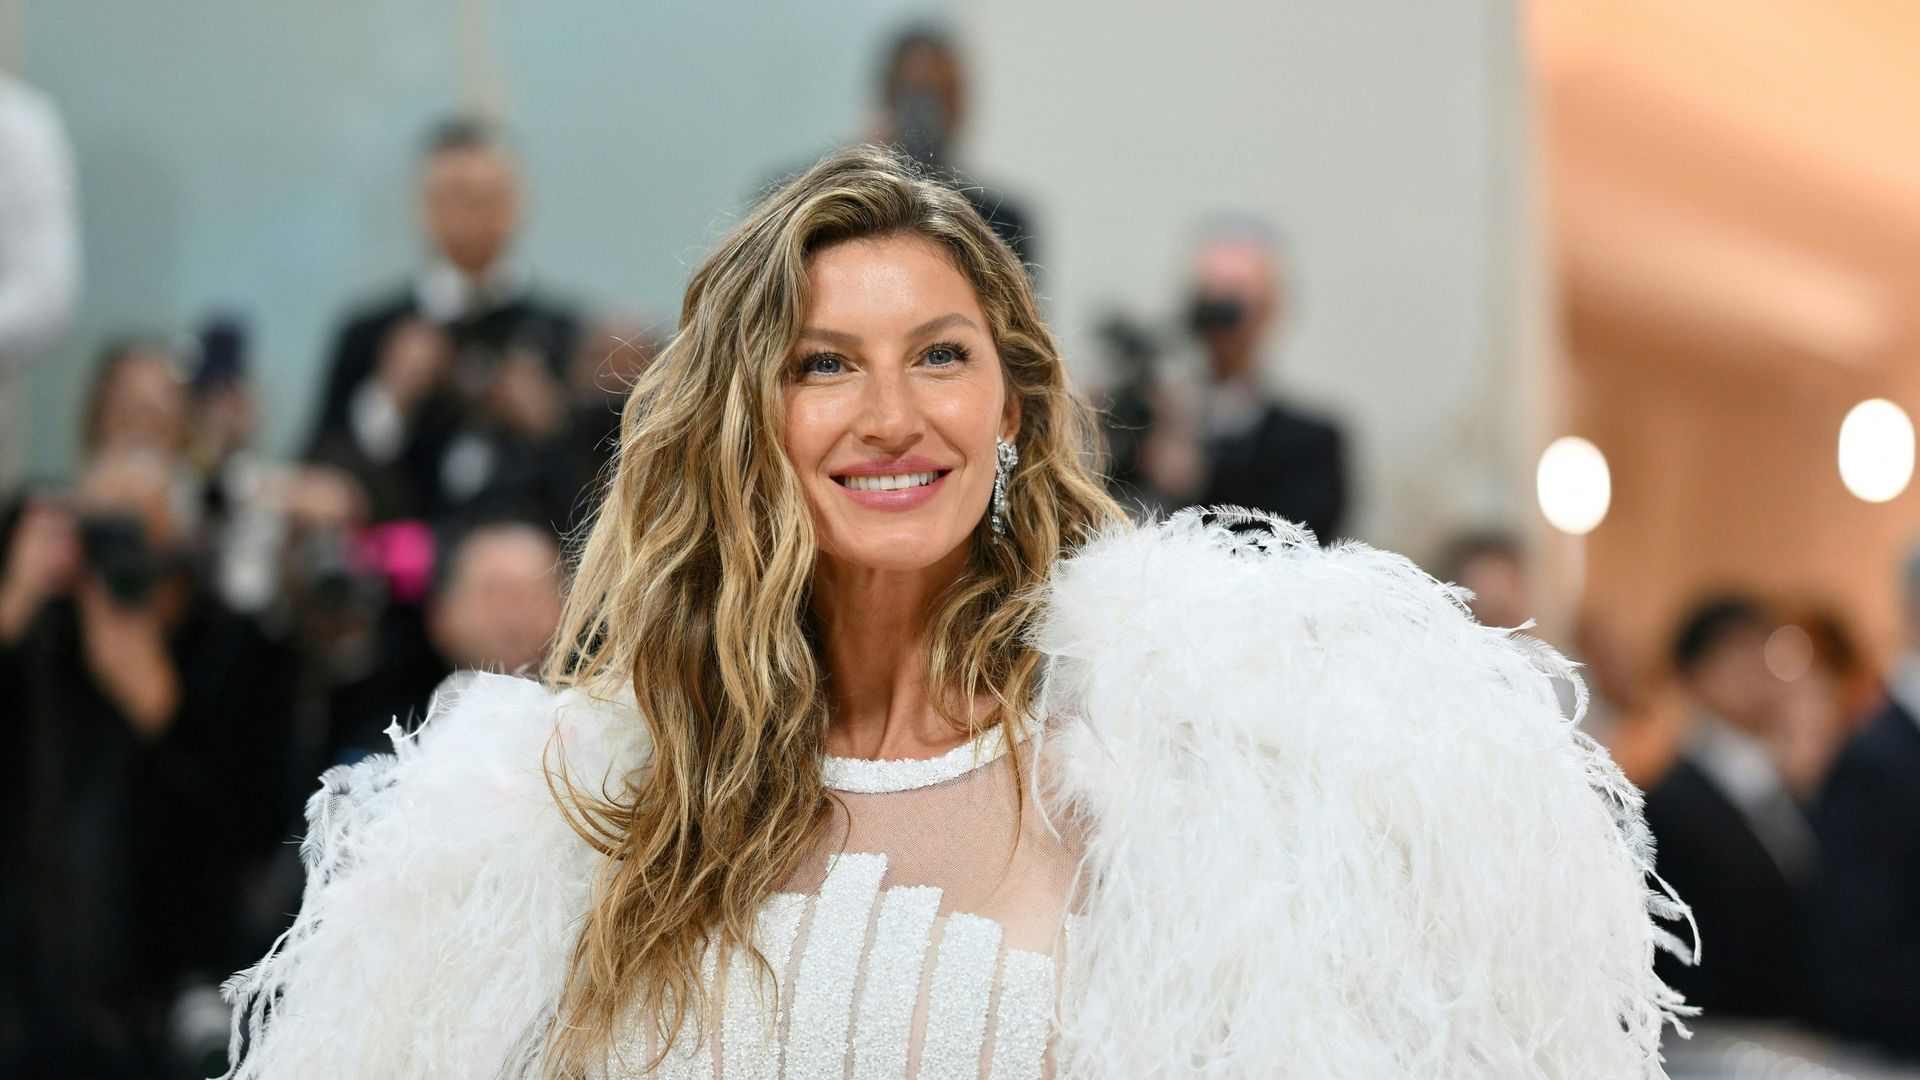 Gisele Bundchen arrives for the 2023 Met Gala at the Metropolitan Museum of Art on May 1, 2023, in New York